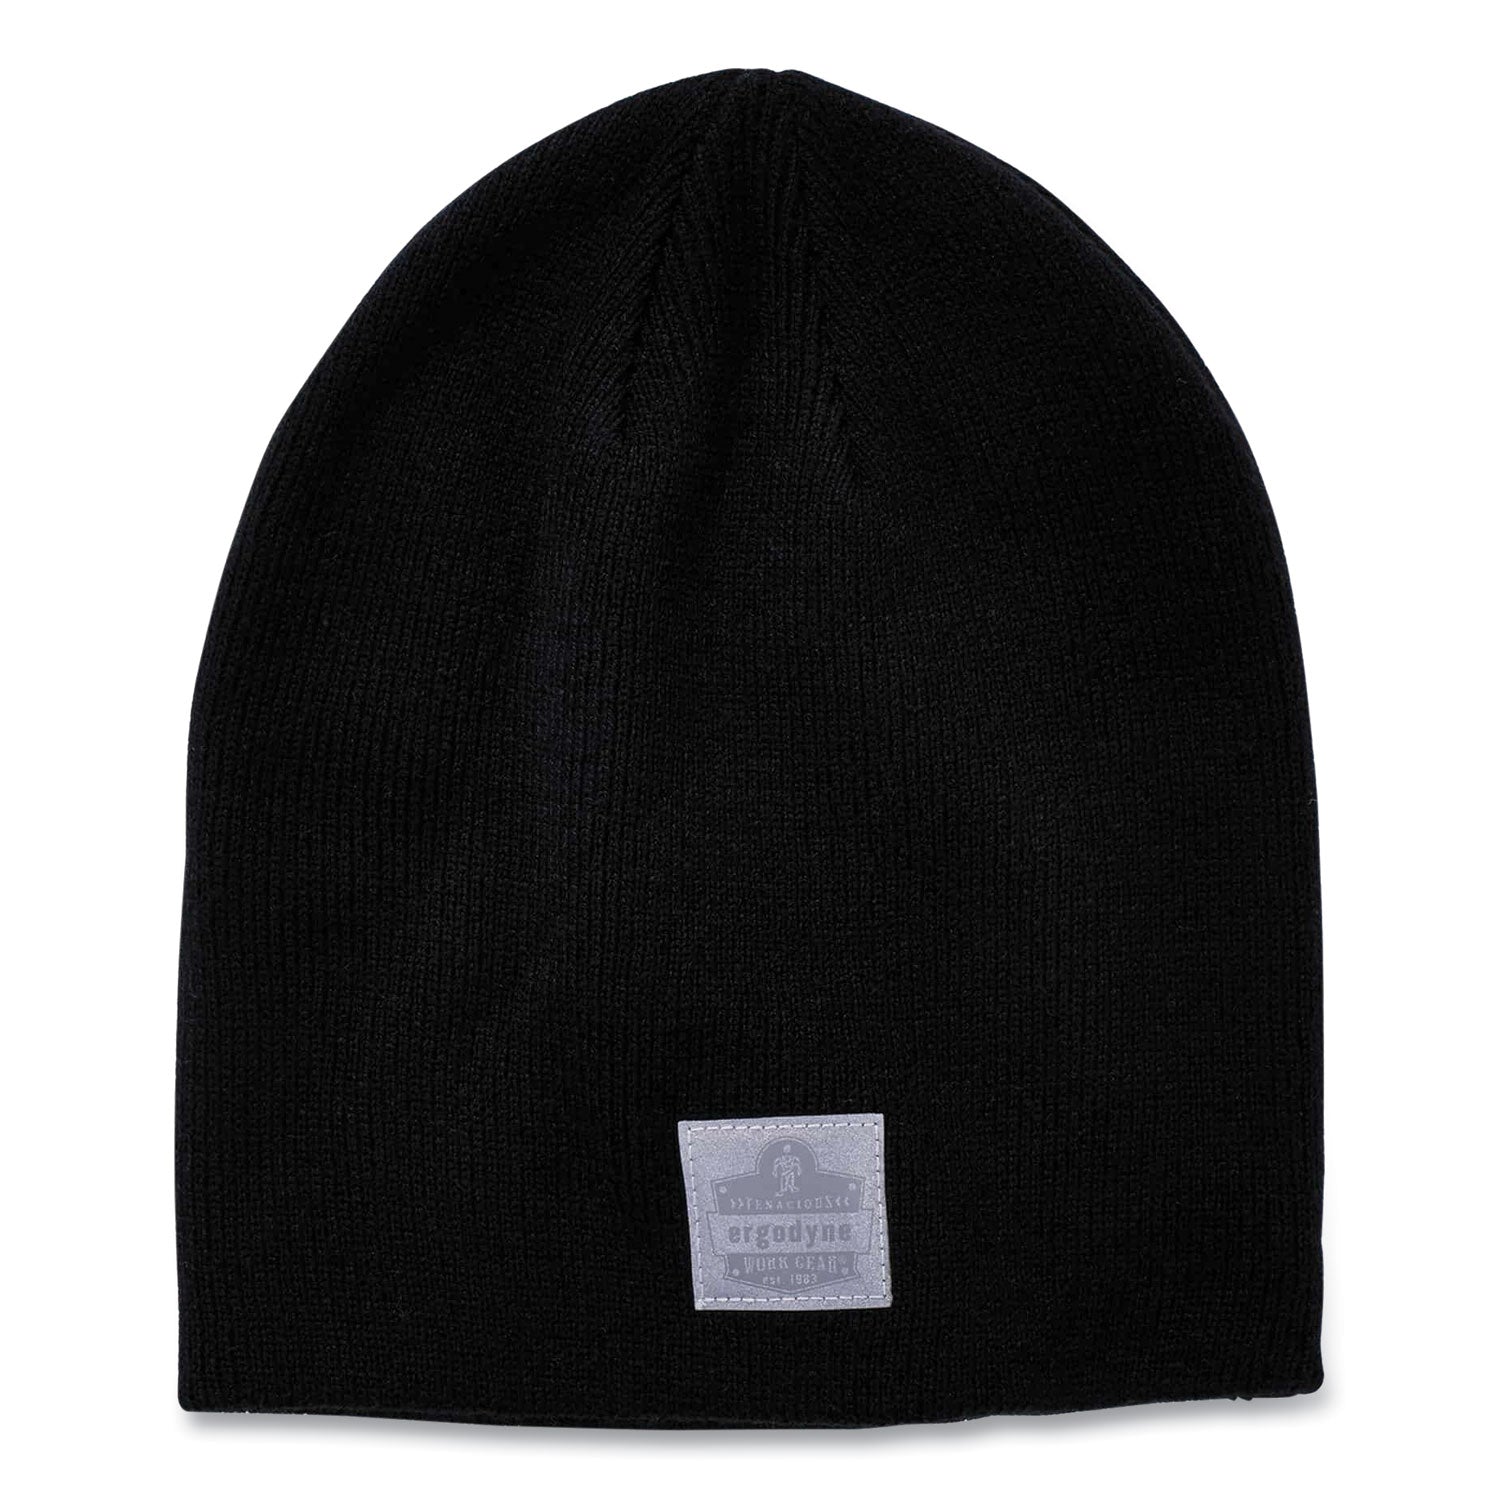 n-ferno-6812-rib-knit-beanie-one-size-fits-most-black-ships-in-1-3-business-days_ego16812 - 1